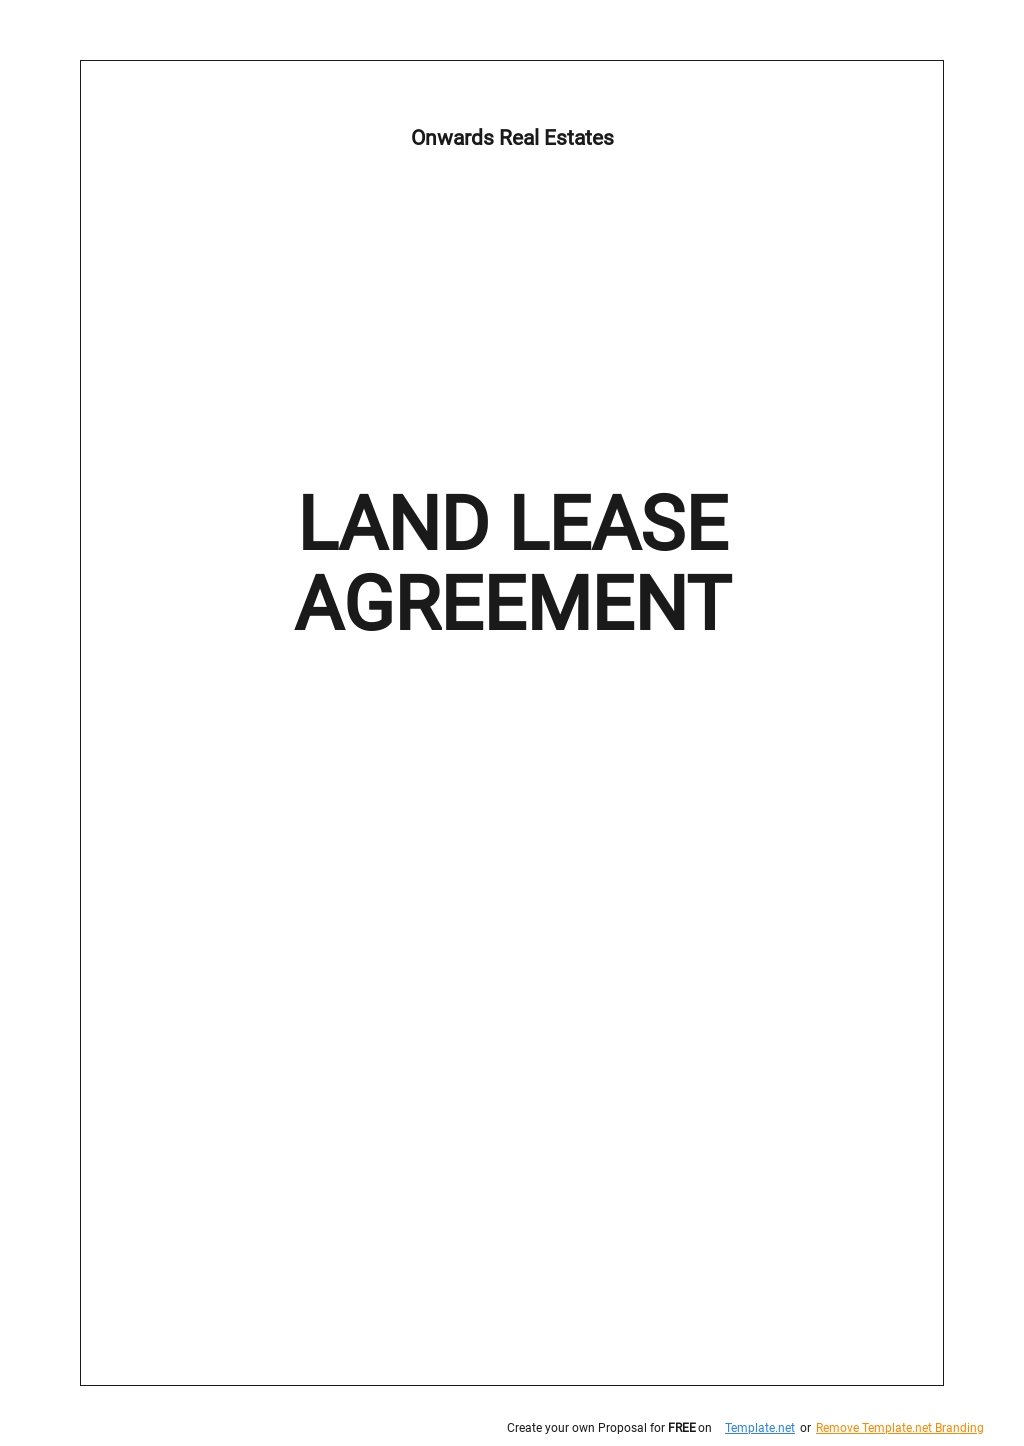 template-for-land-lease-agreement